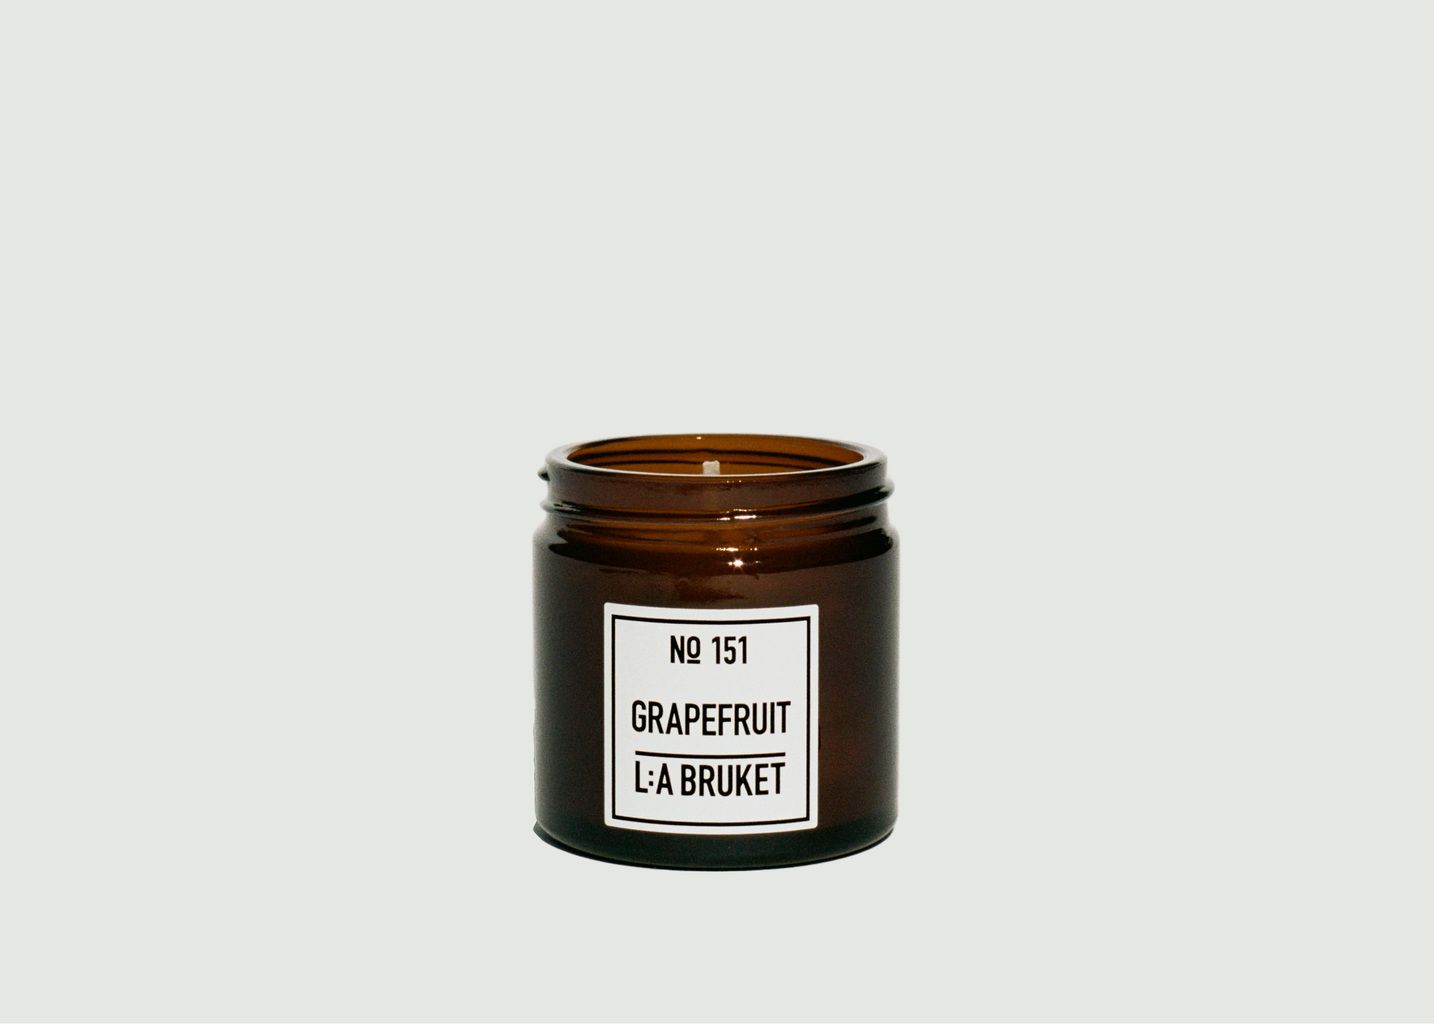 L:A Bruket Scented Candle 151